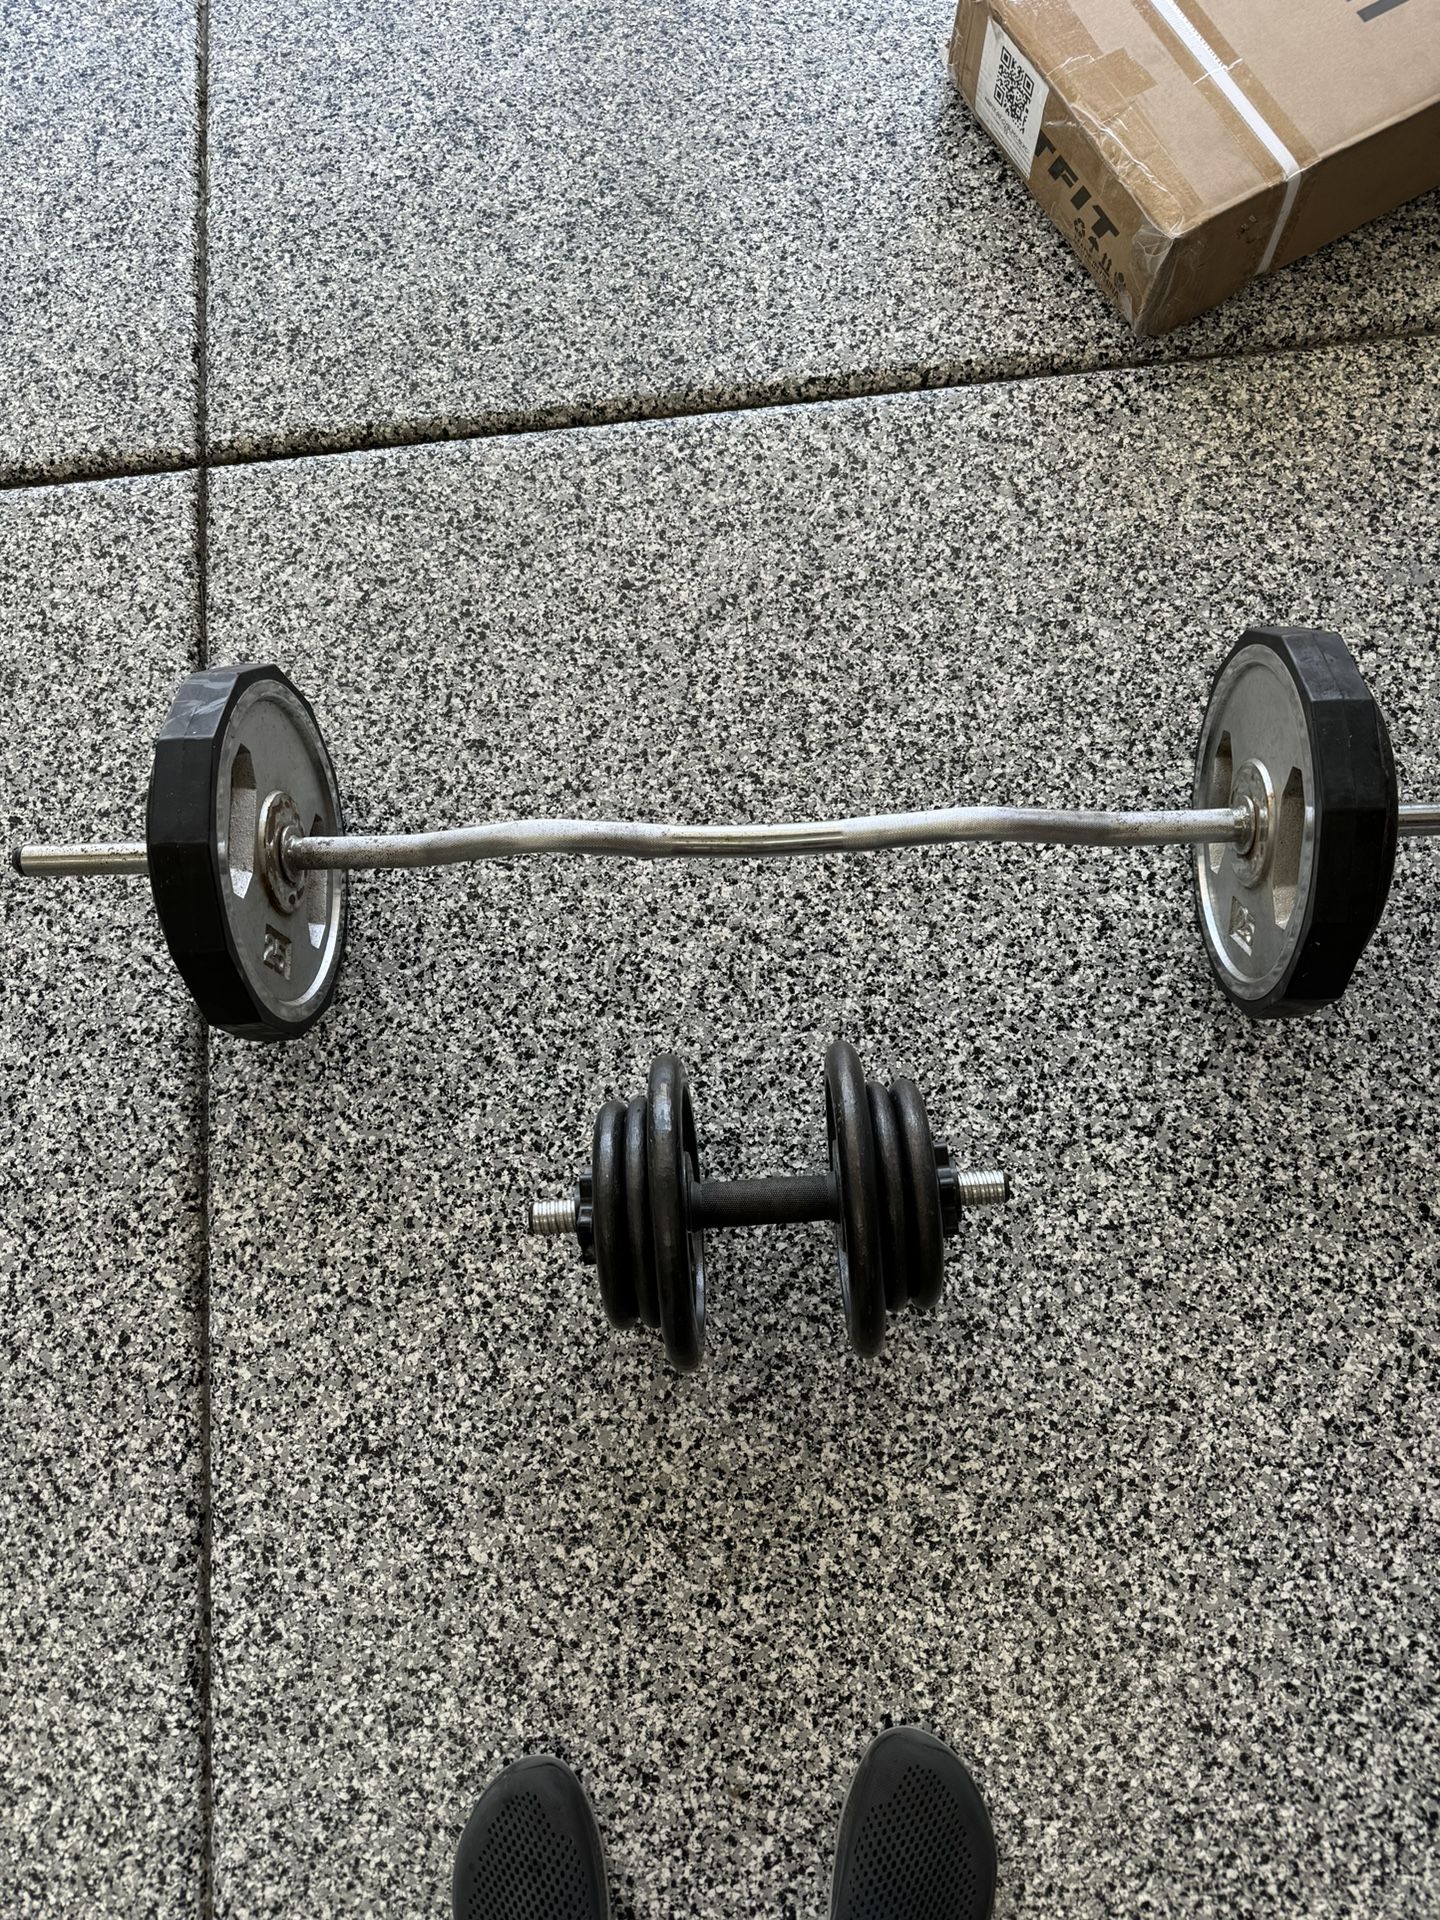 110 Pounds Of 1” Weights. 1” Straight Bar Dumbbell, 1 